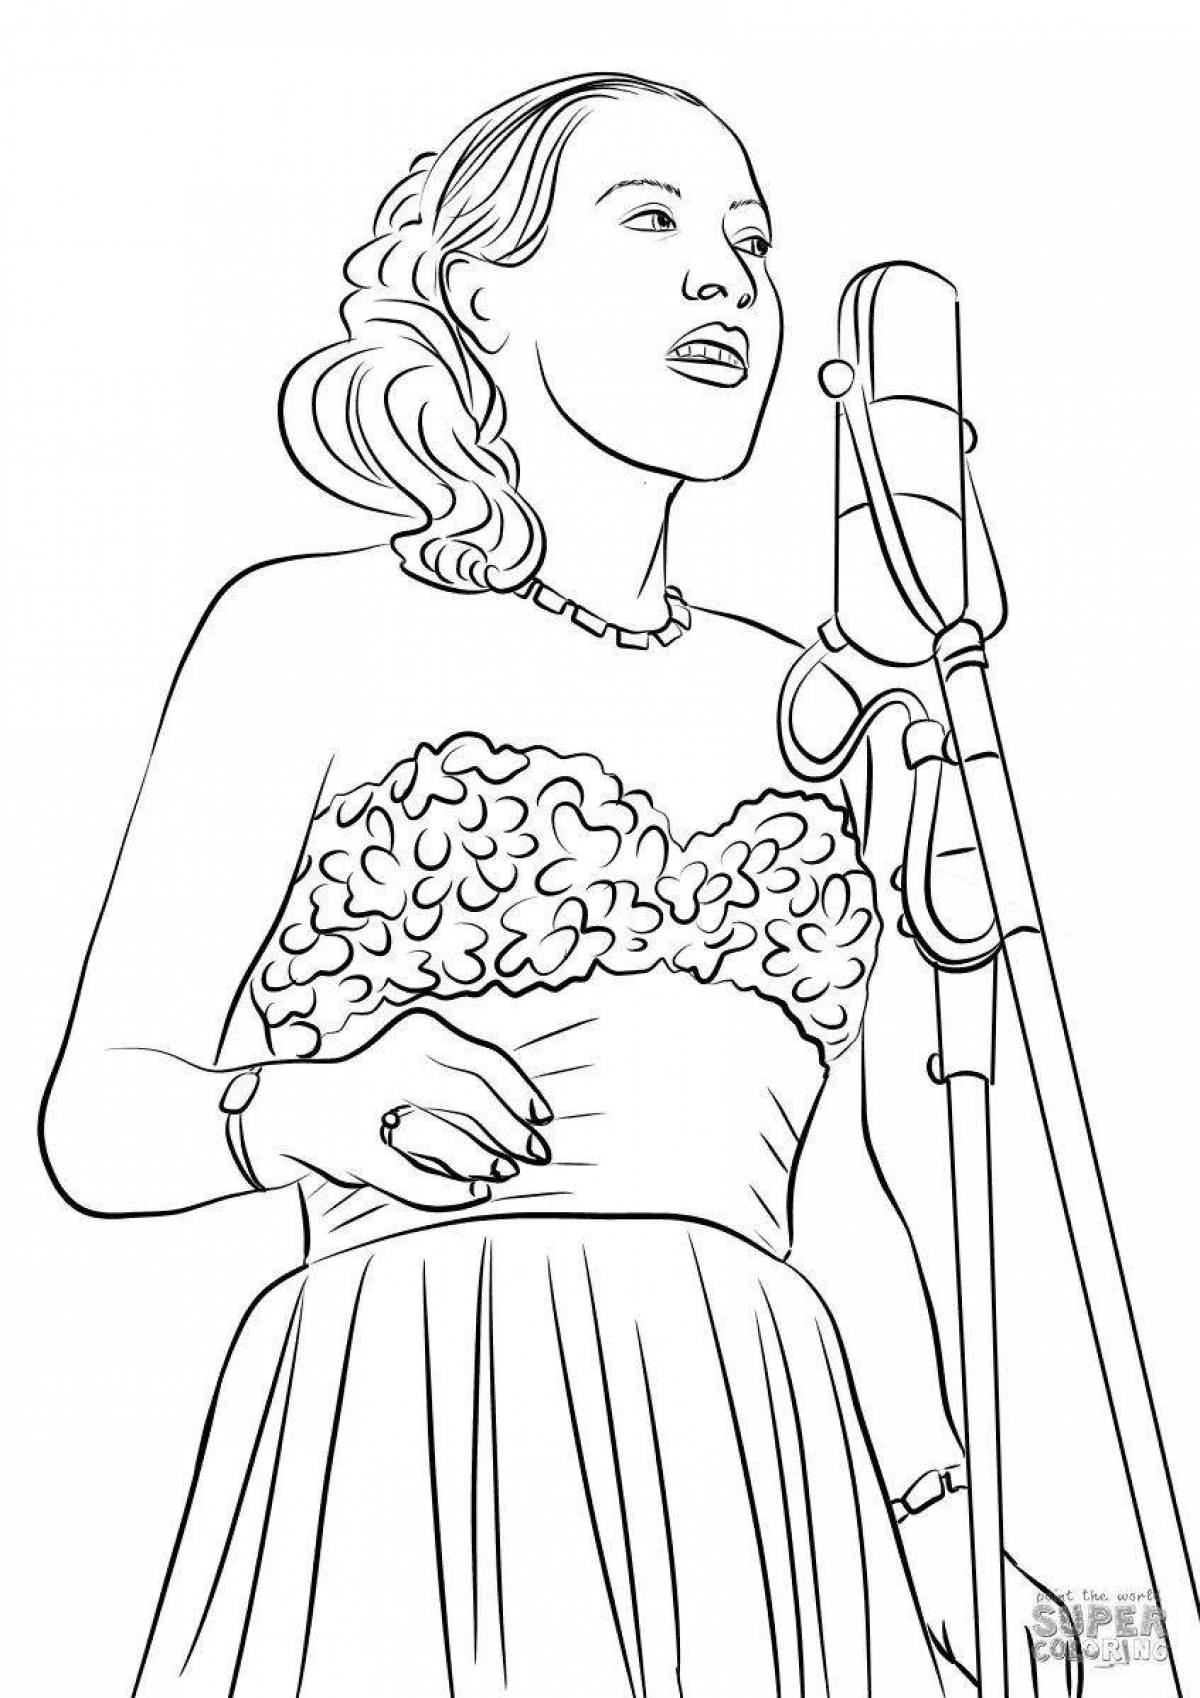 Singer coloring page